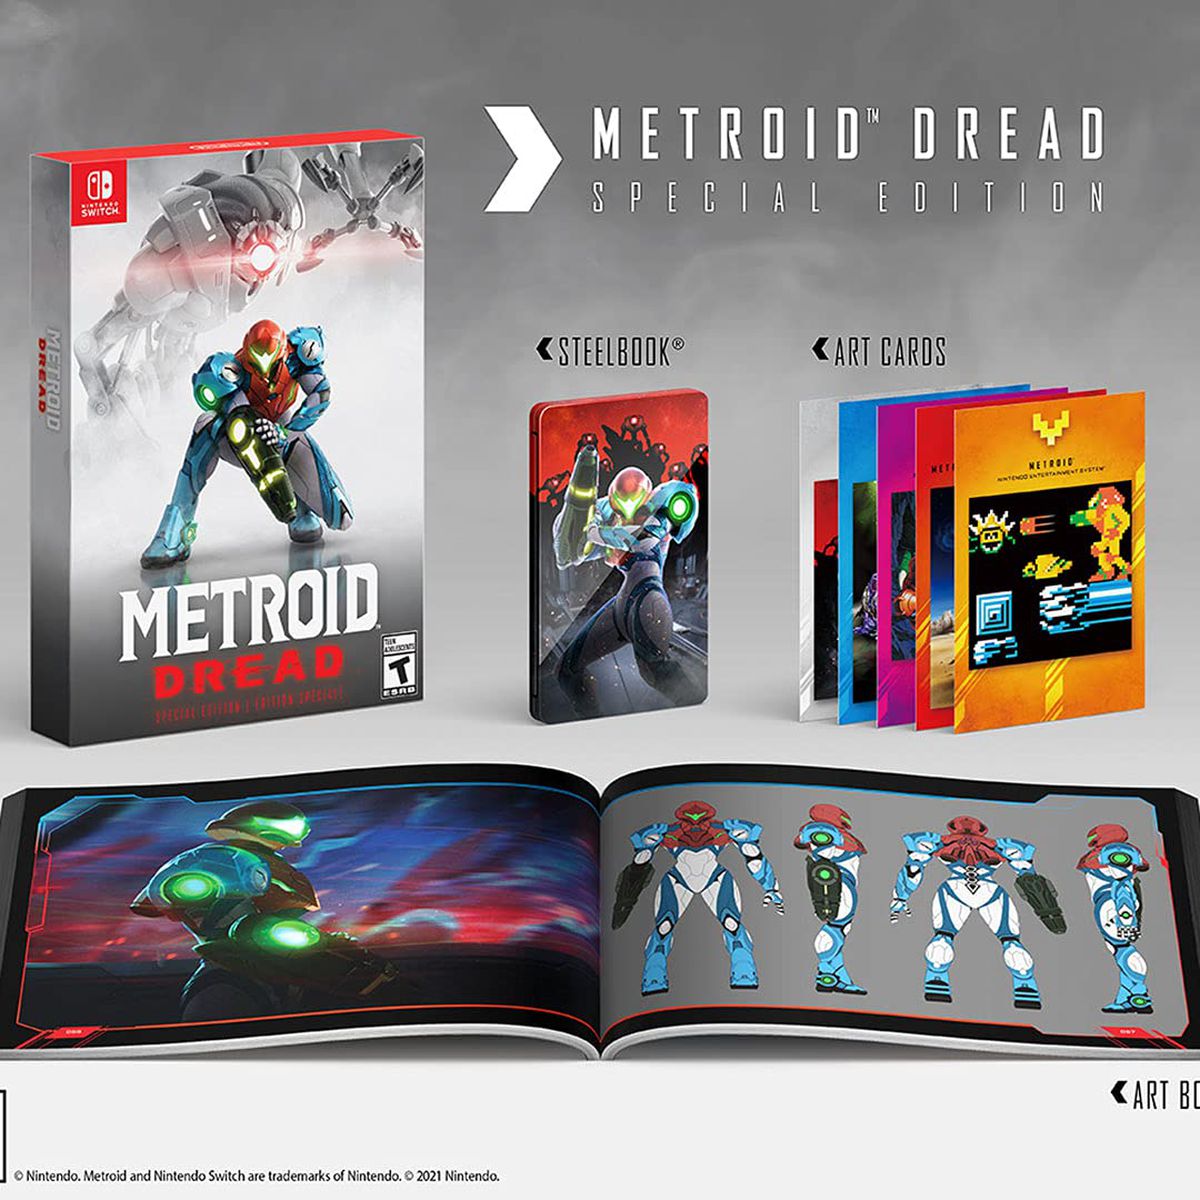 The special edition of Metroid Dread